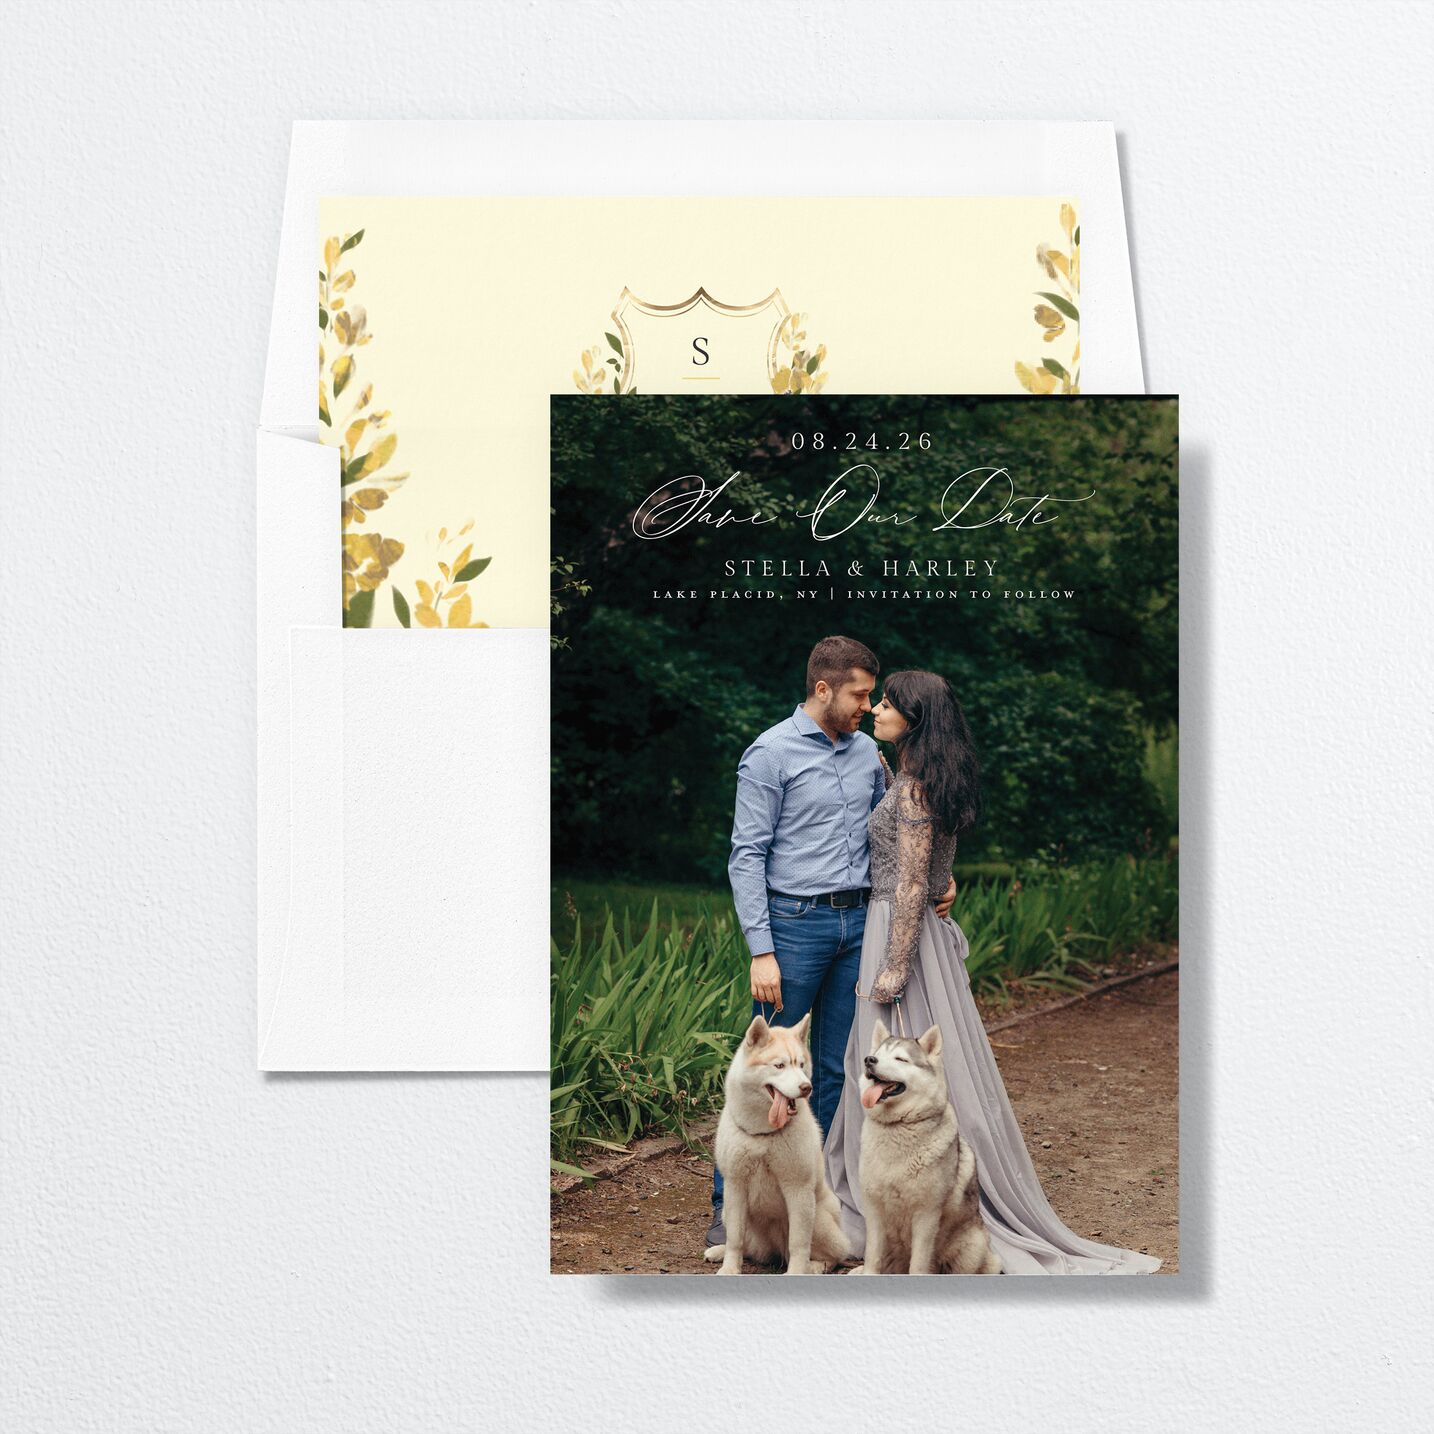 Delphinium Crest Save the Date Cards envelope-and-liner in yellow